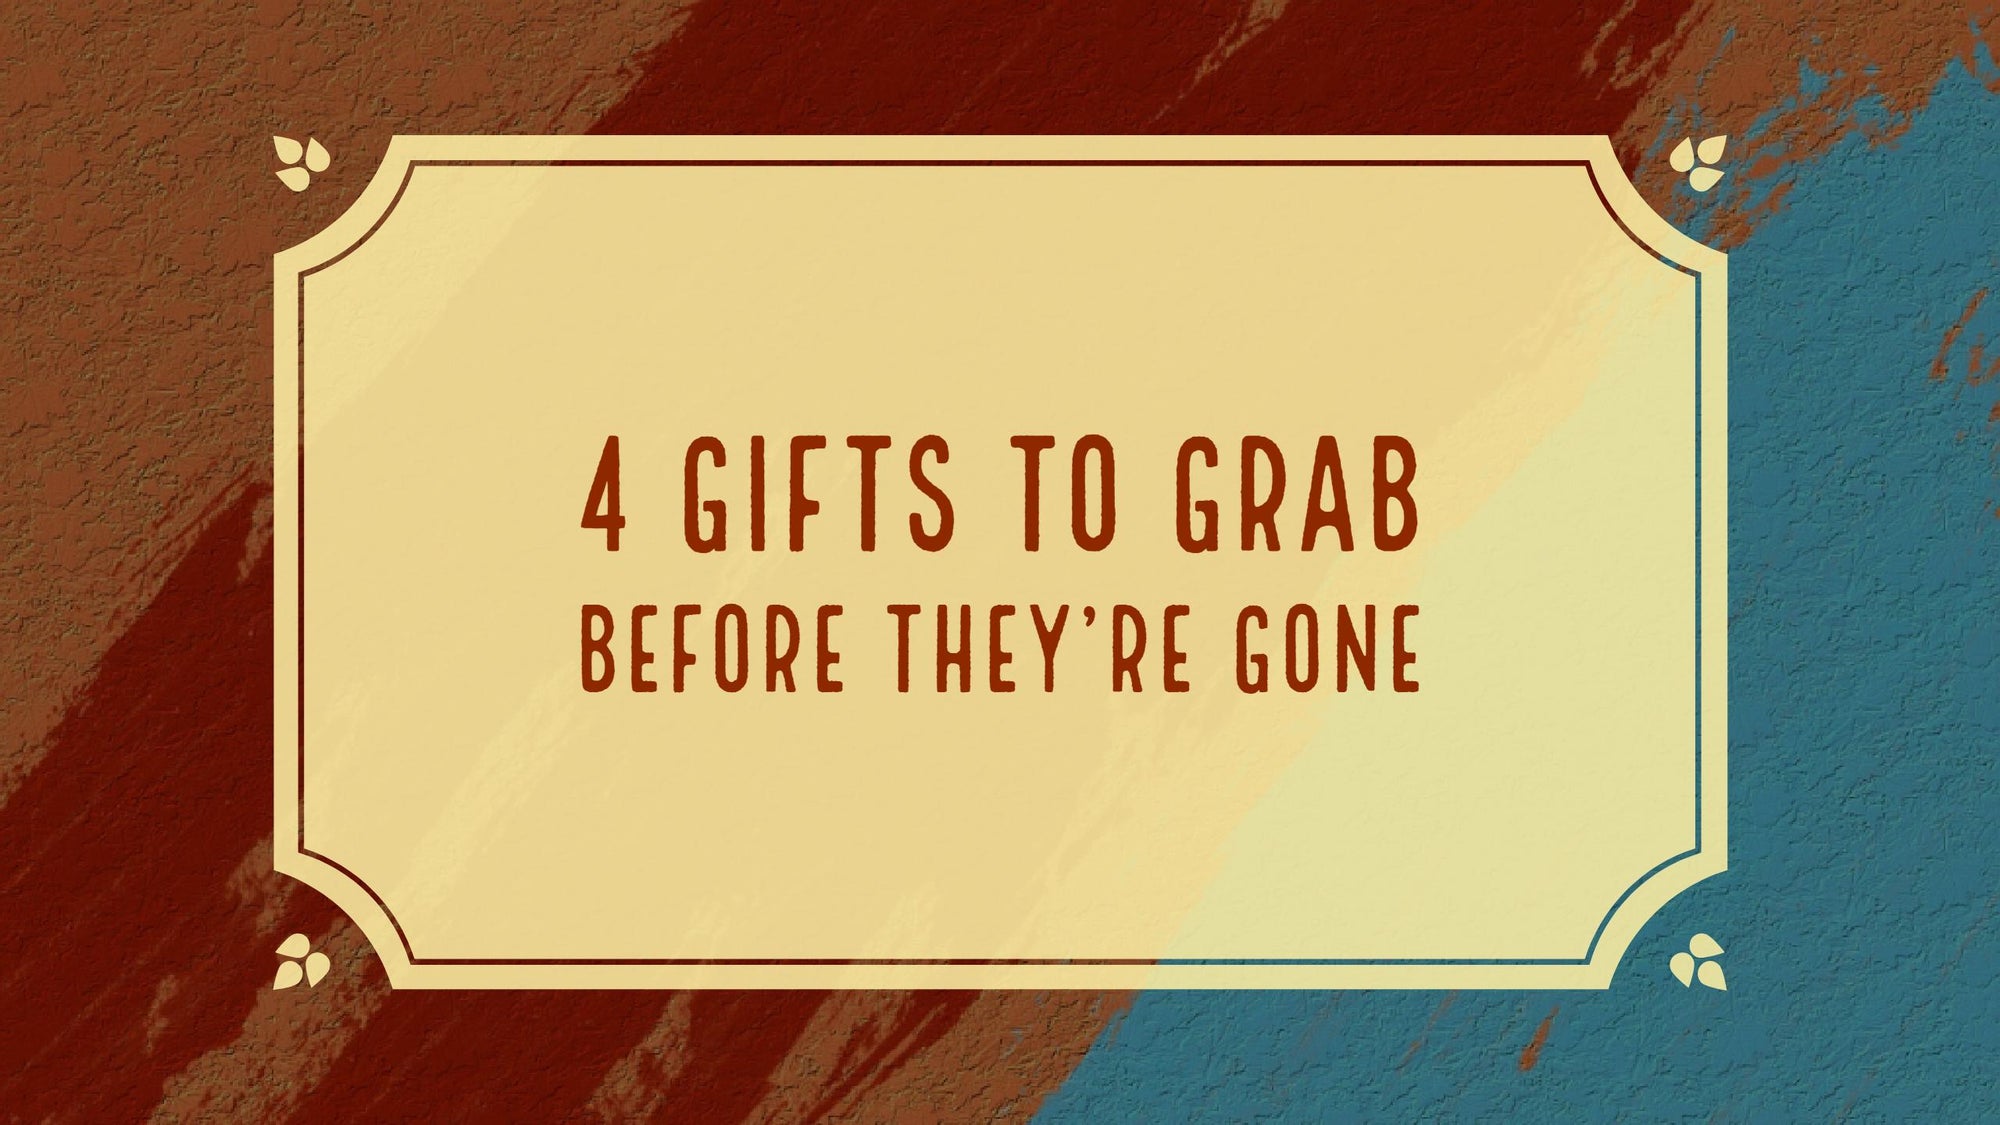 4 Gifts to Grab Before They're Gone